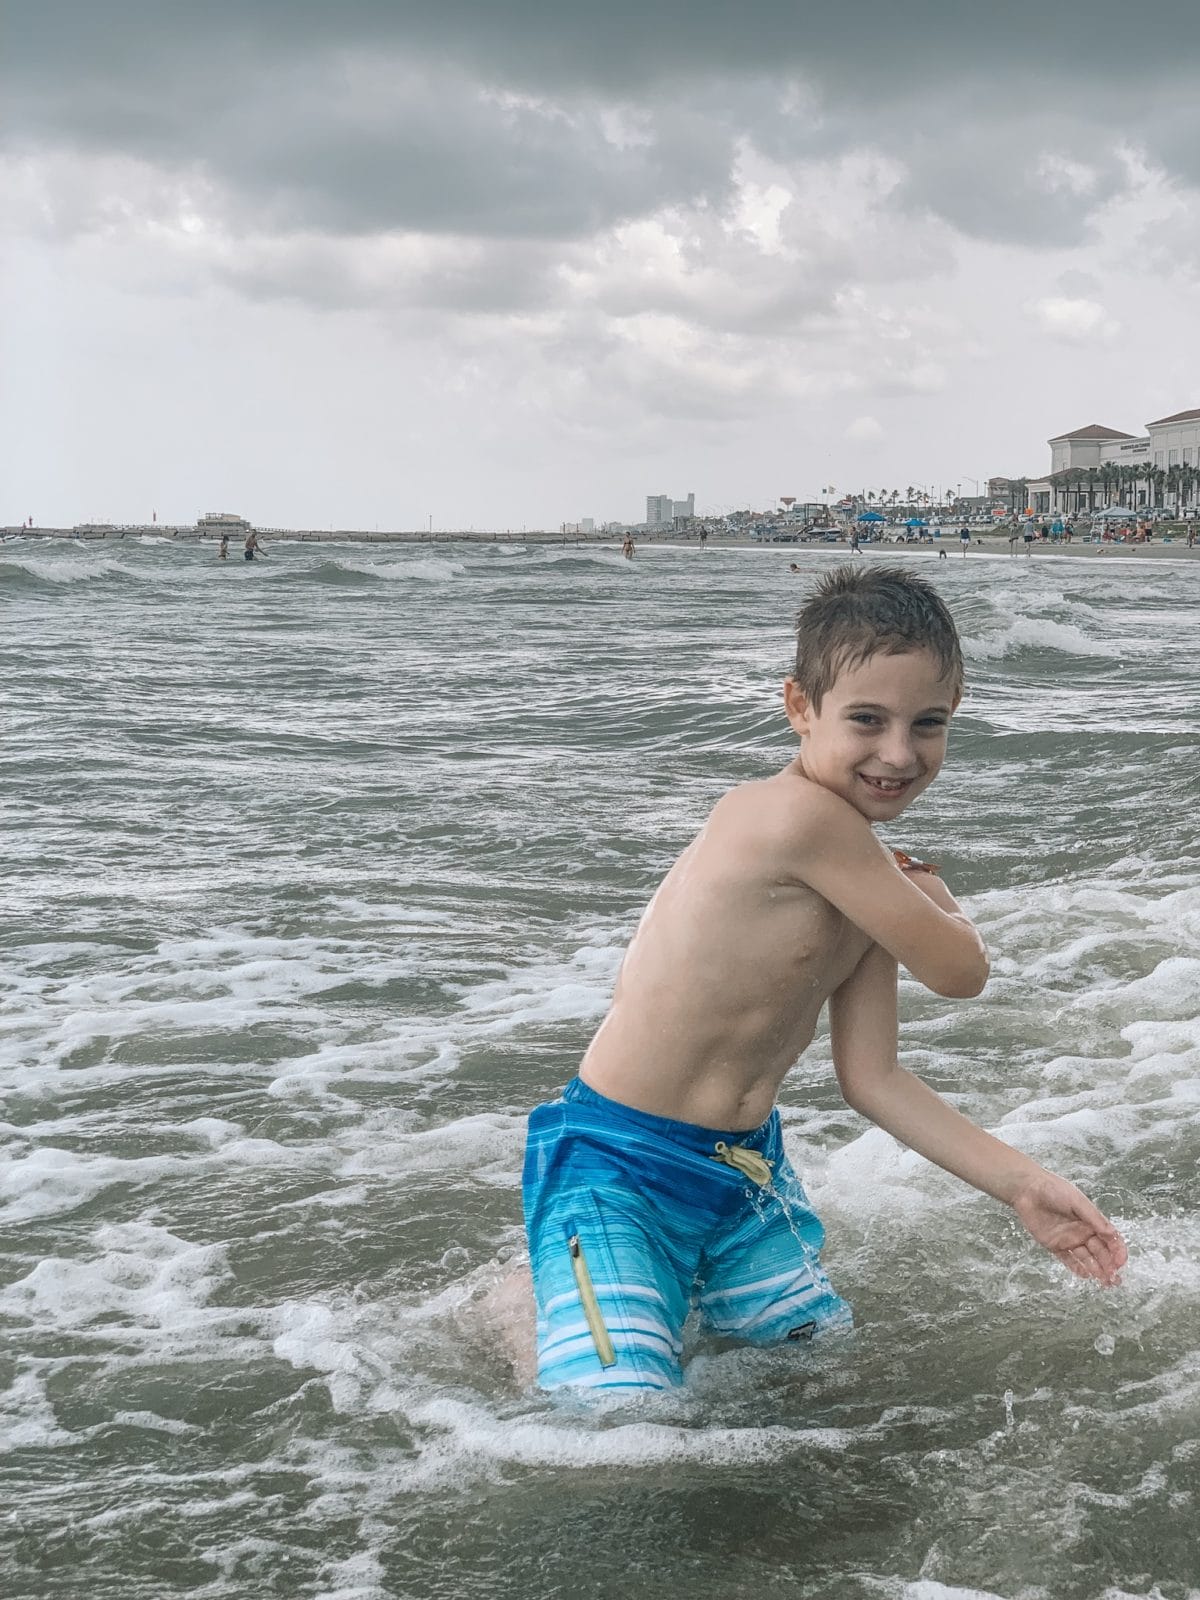 48 Hours in Galveston - playing in the ocean